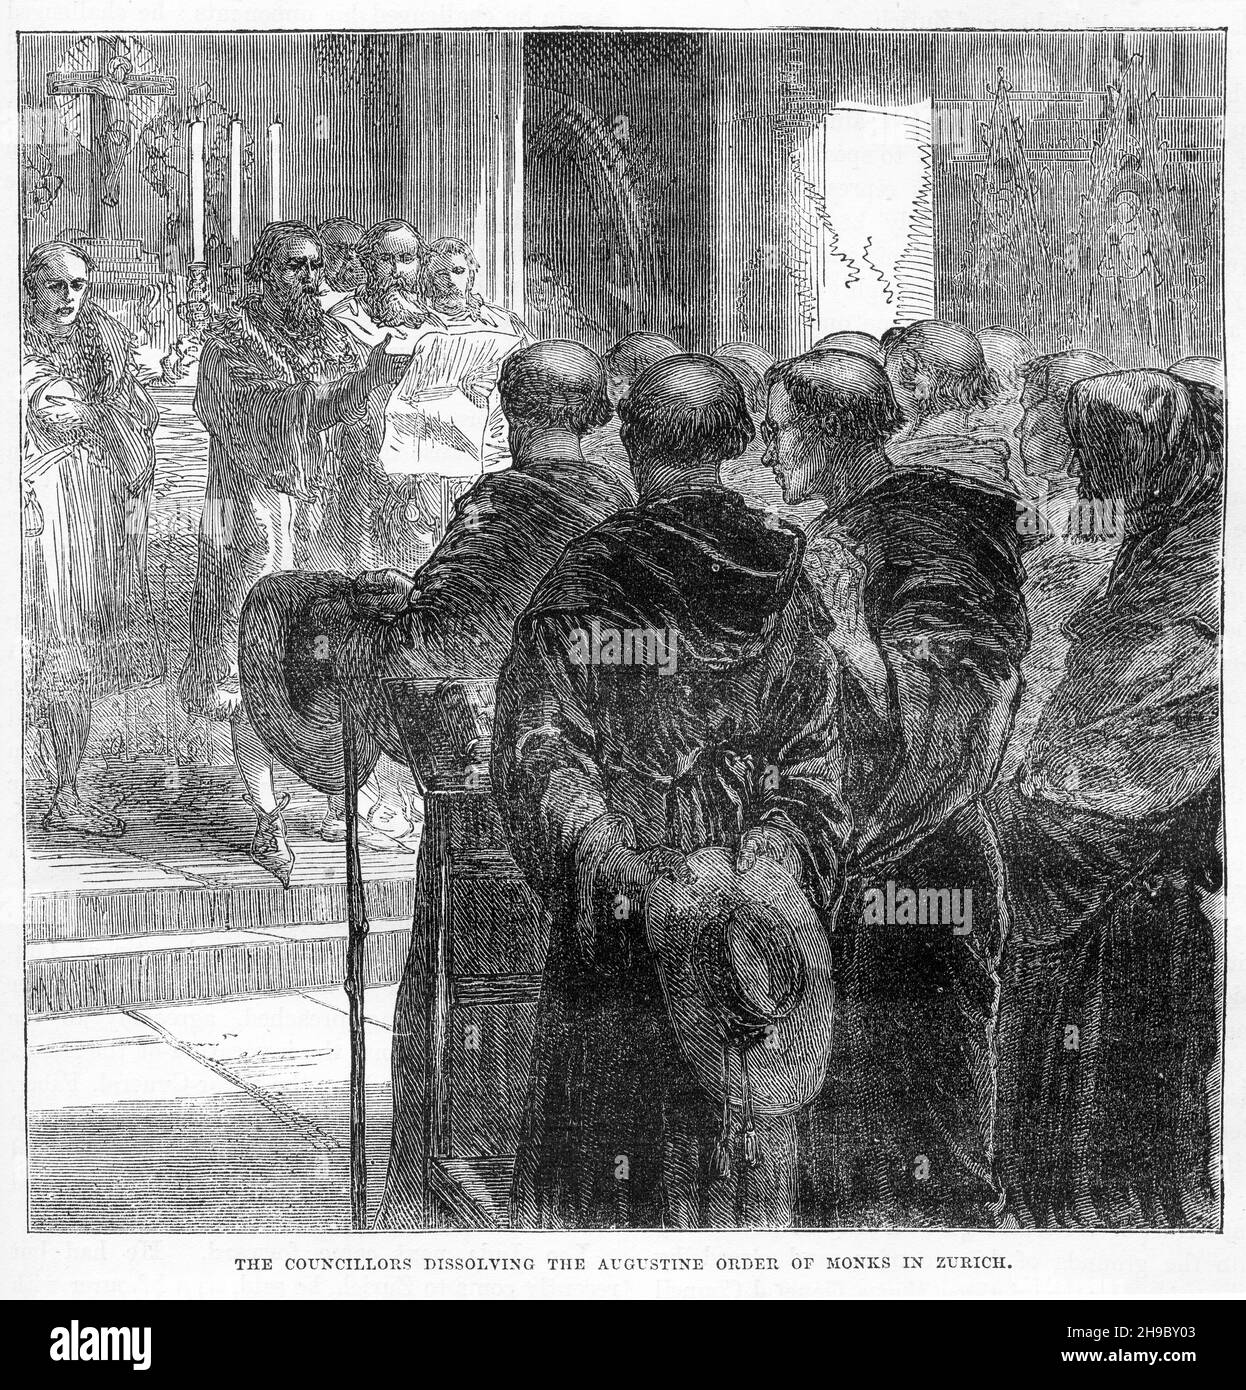 Engraving of the councillors dissolving the Augustine Order of the Catholic Church in Zurich, a milestone in the spread of the Reformation during the 1500s. Stock Photo